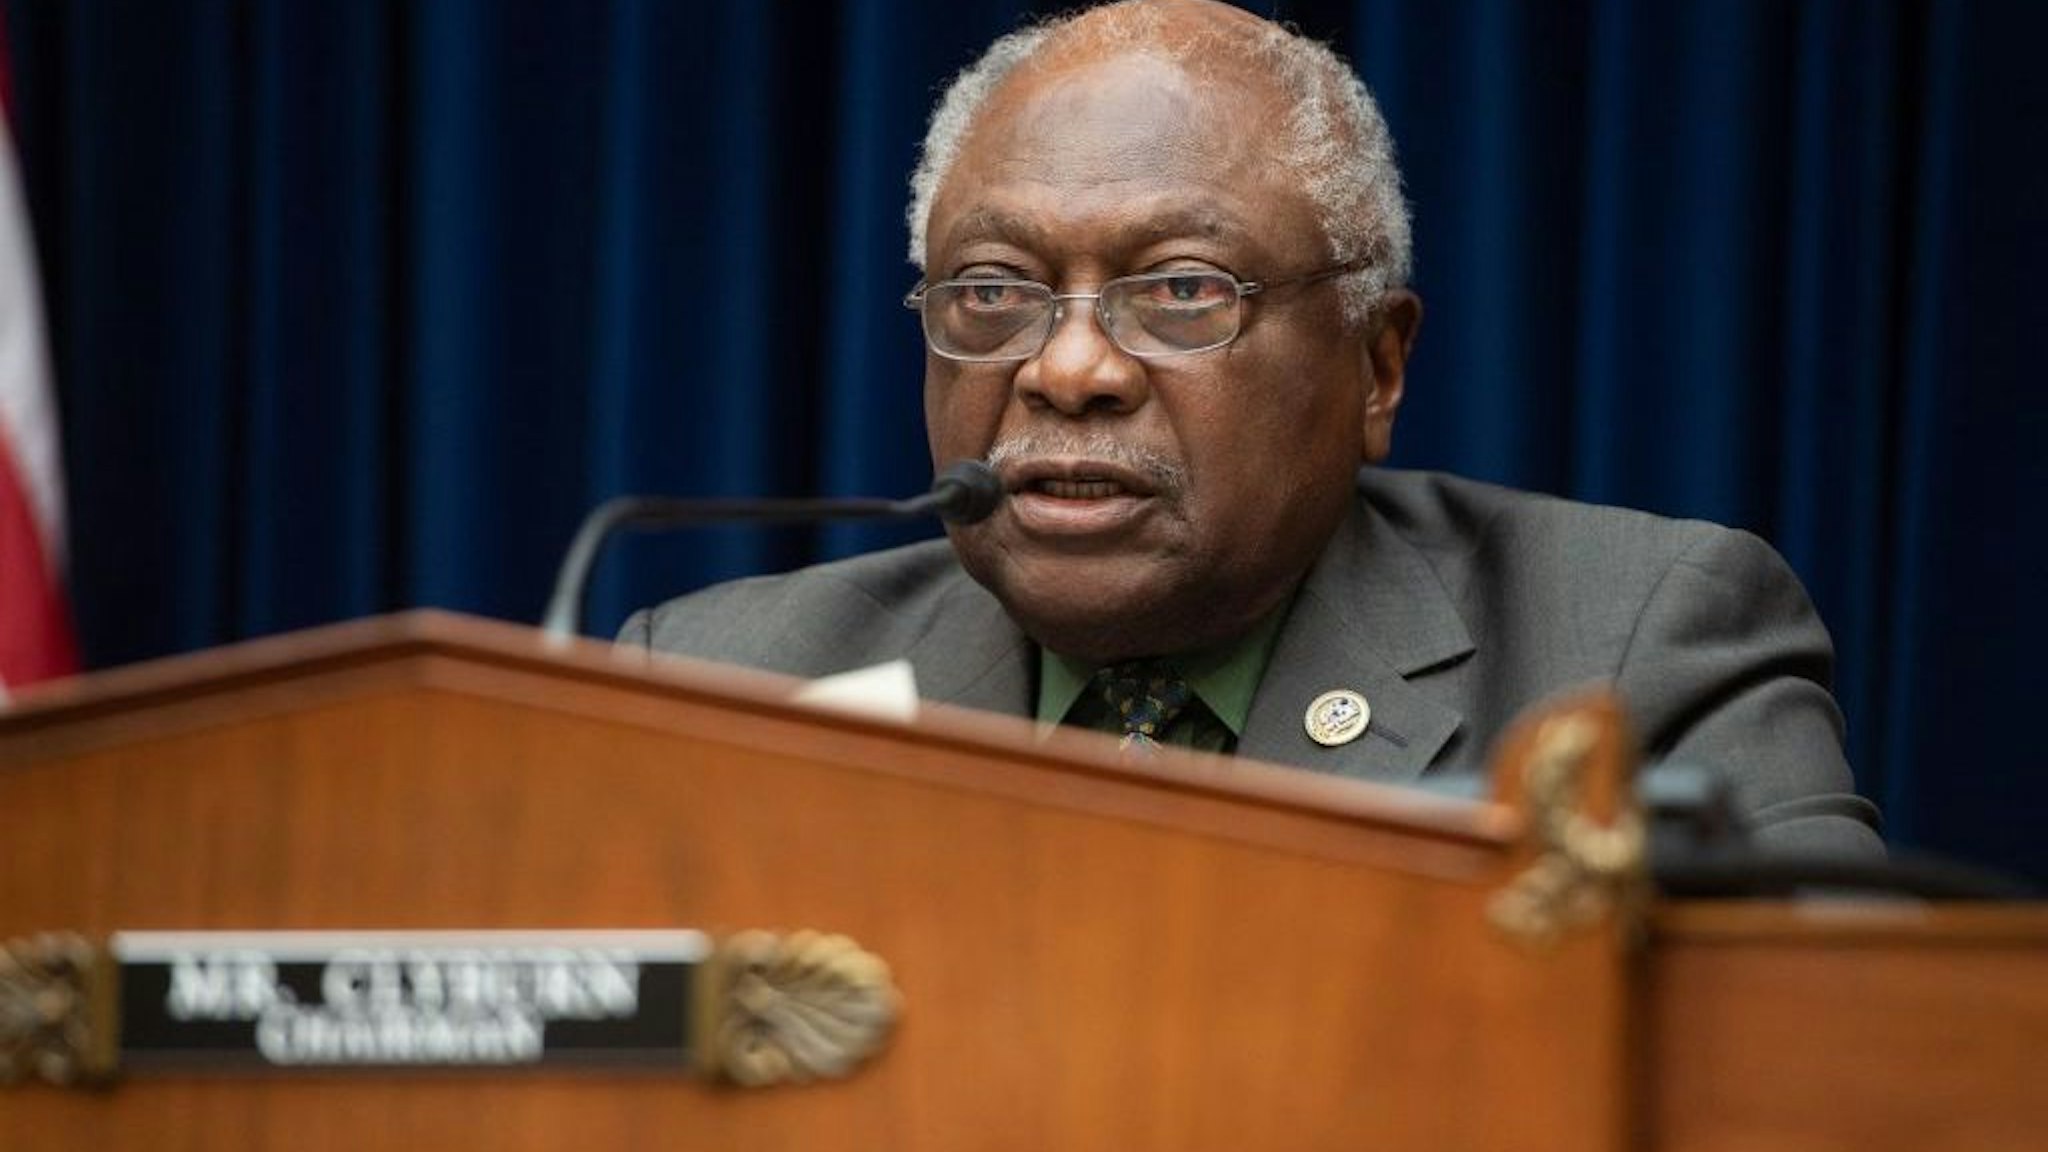 US Representative James Clyburn, Democrat of South Carolina and committee chairman, speaks as Federal Reserve Board Chairman Jerome Powell testifies on the Federal Reserve's response to the coronavirus pandemic during a House Oversight and Reform Select Subcommittee hearing on Capitol Hill in Washington, DC, June 22, 2021. (Photo by SAUL LOEB / POOL / AFP) (Photo by SAUL LOEB/POOL/AFP via Getty Images)